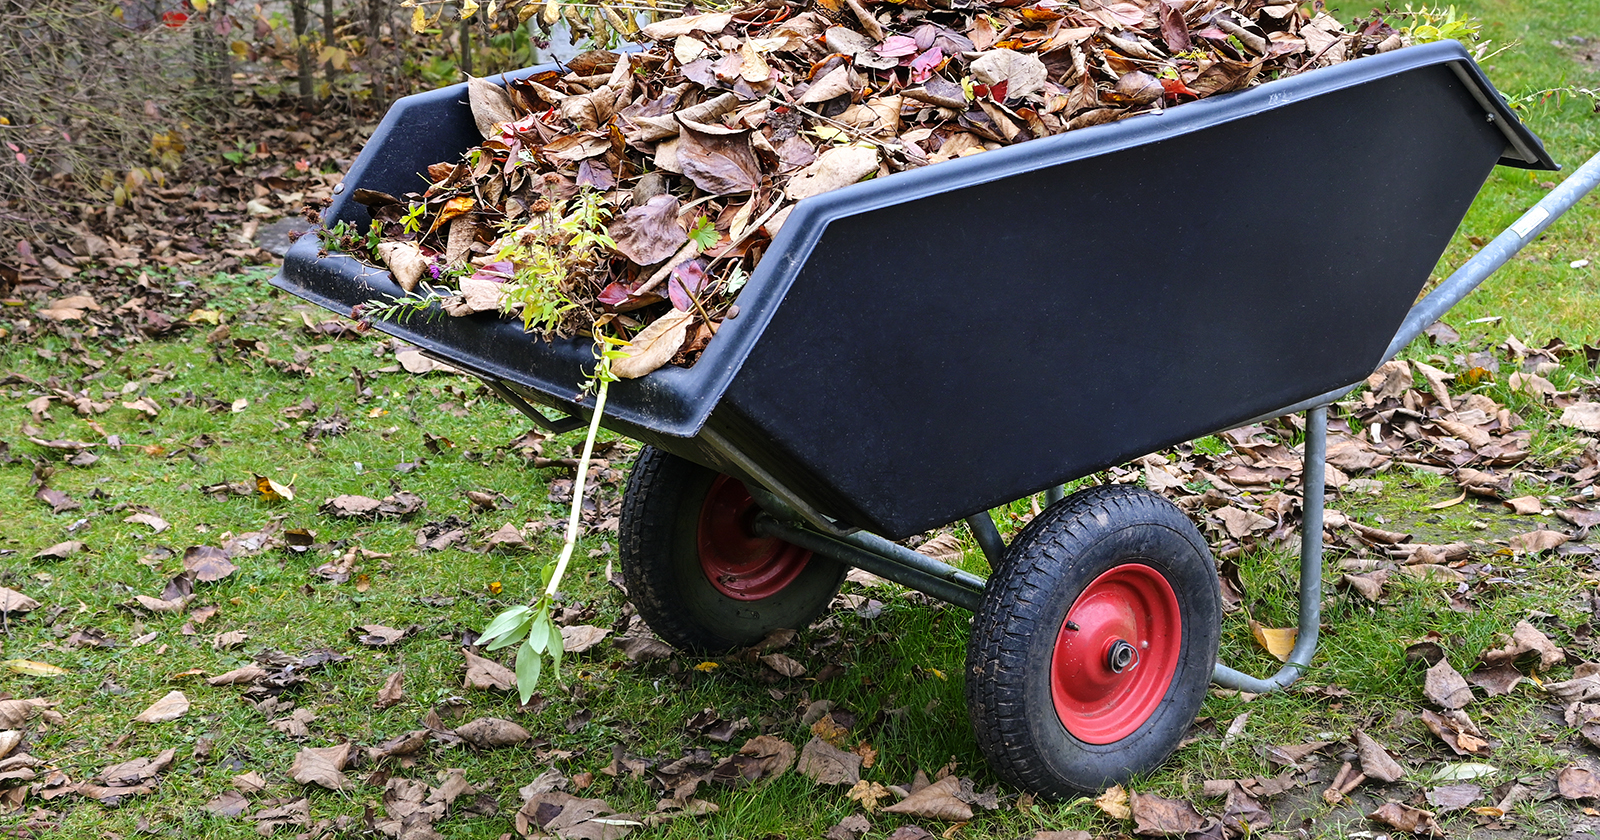 ATV Trailer with Leaves on Grass